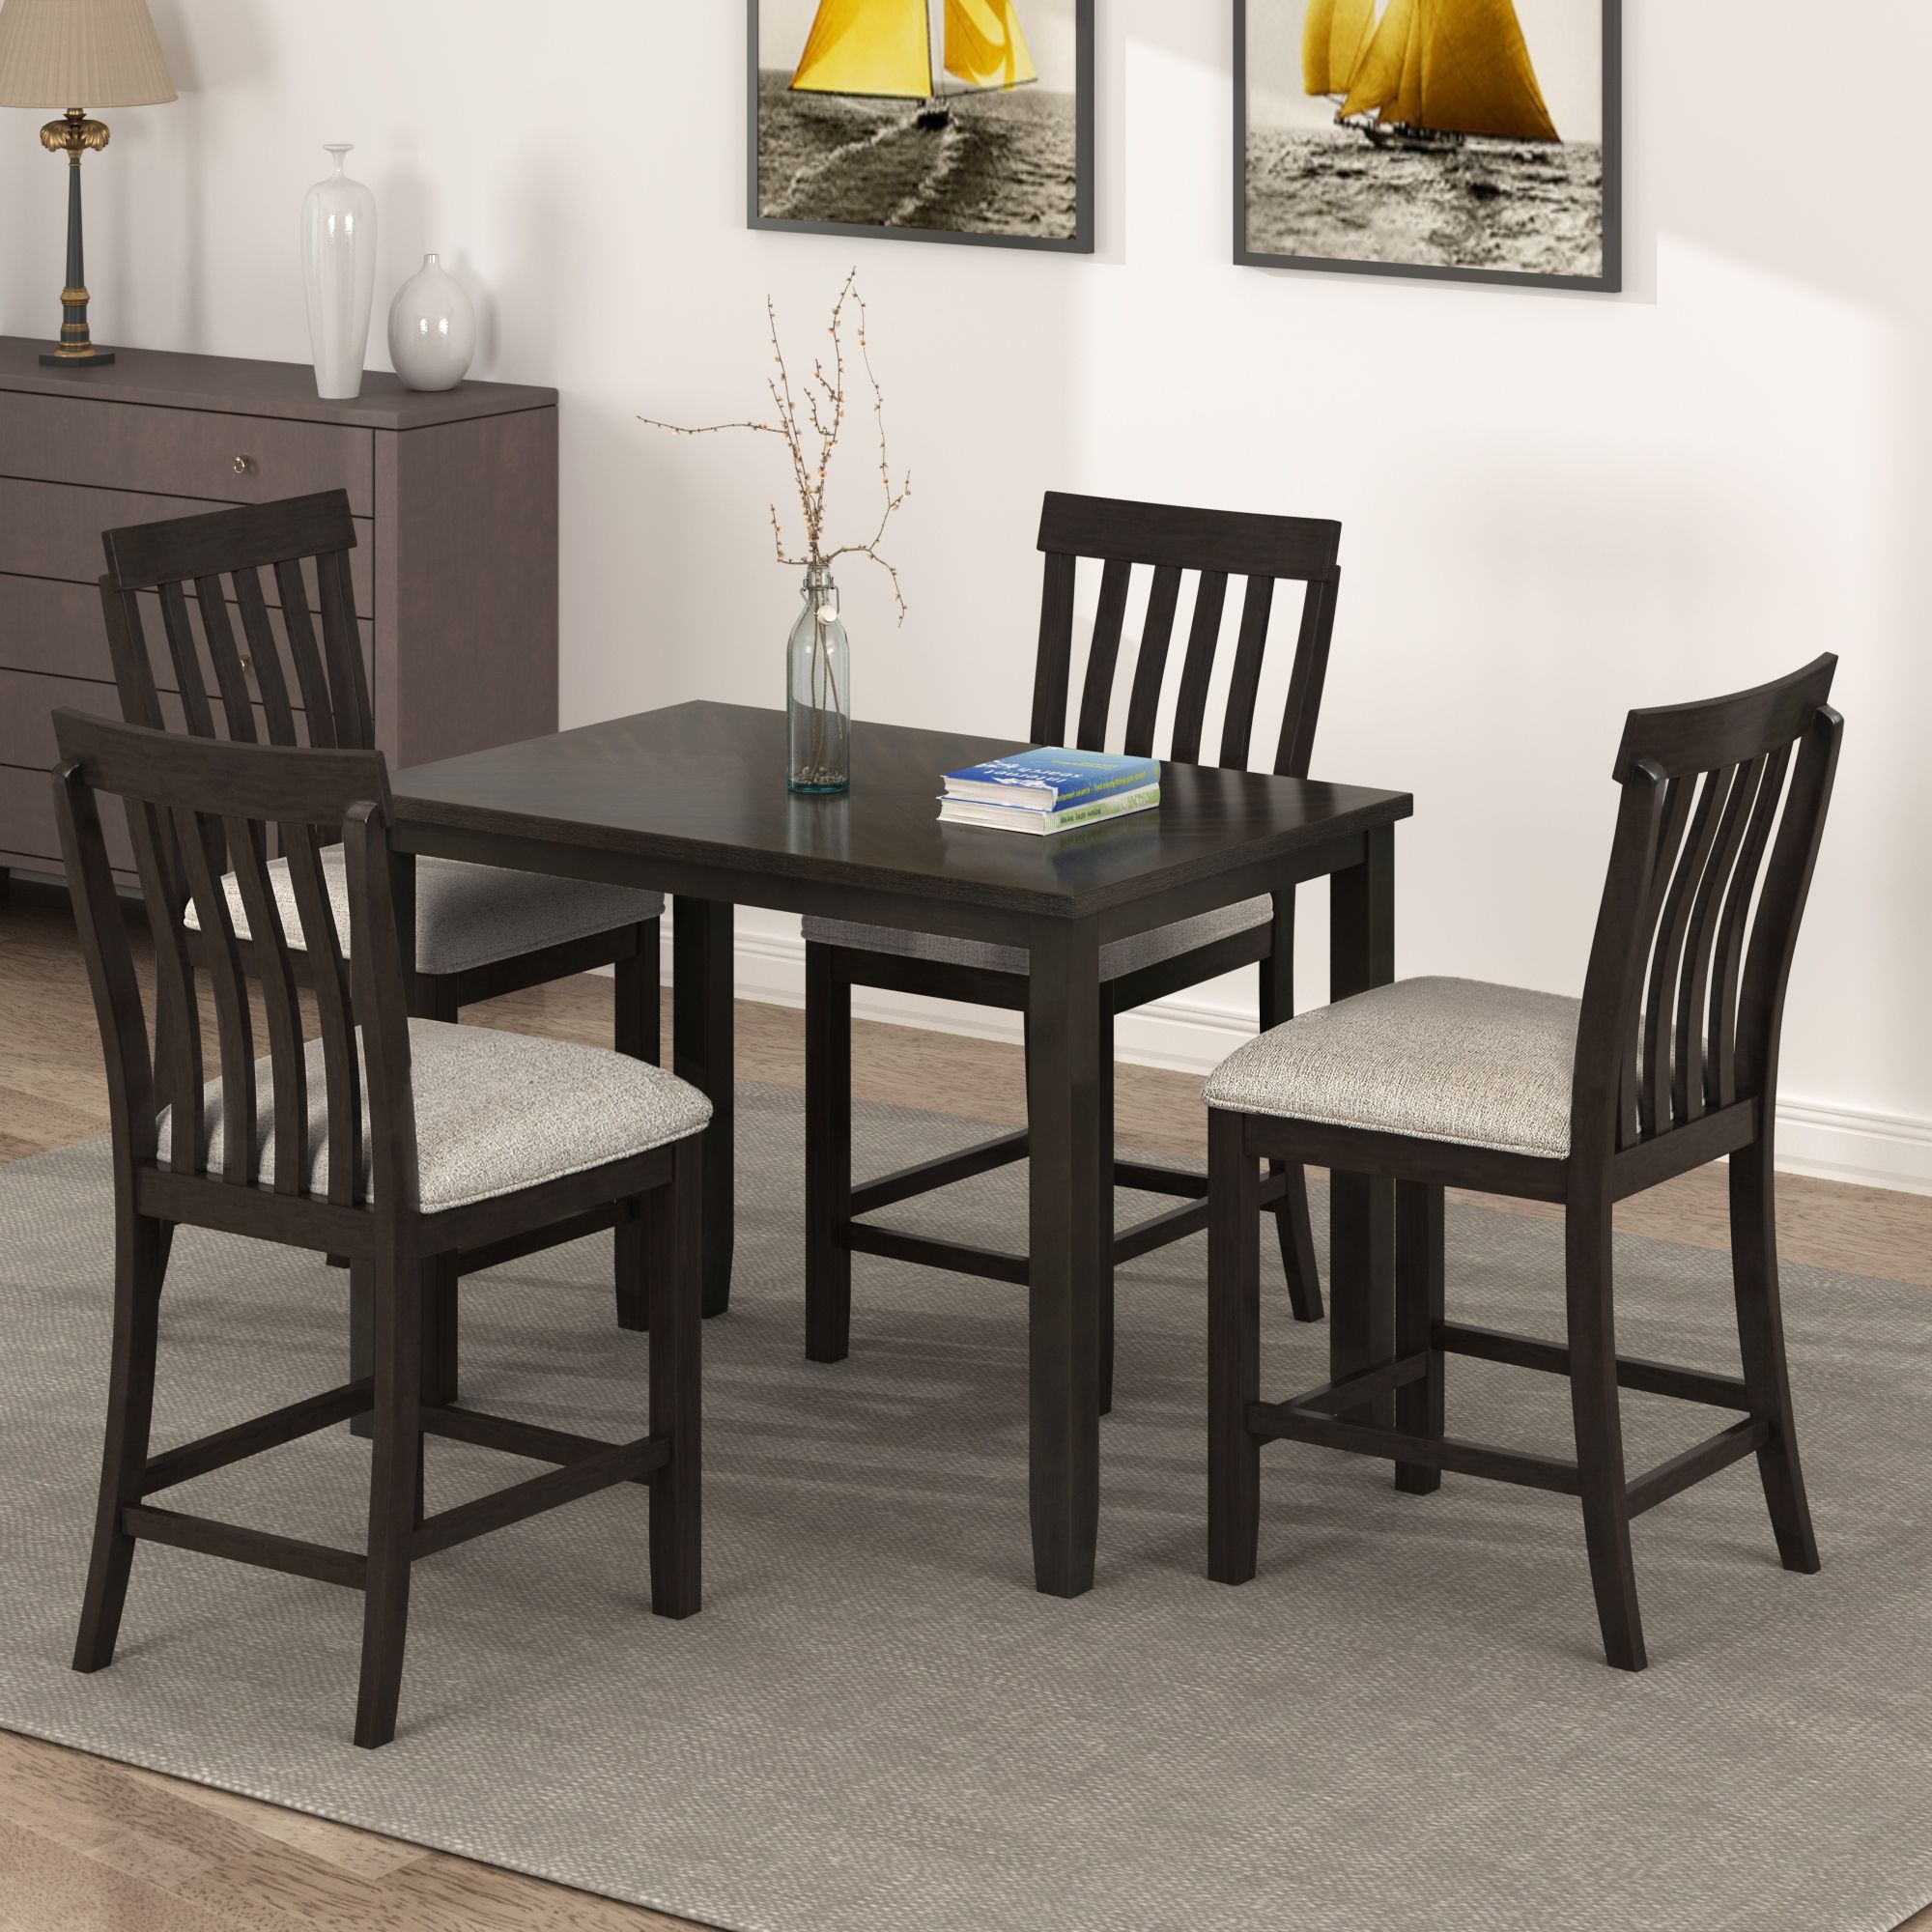 Famous Wood Bistro Table And Chairs Sets Regarding Breakfast Nook Table Set, Amway Contemporary Counter Height Dining (View 1 of 15)